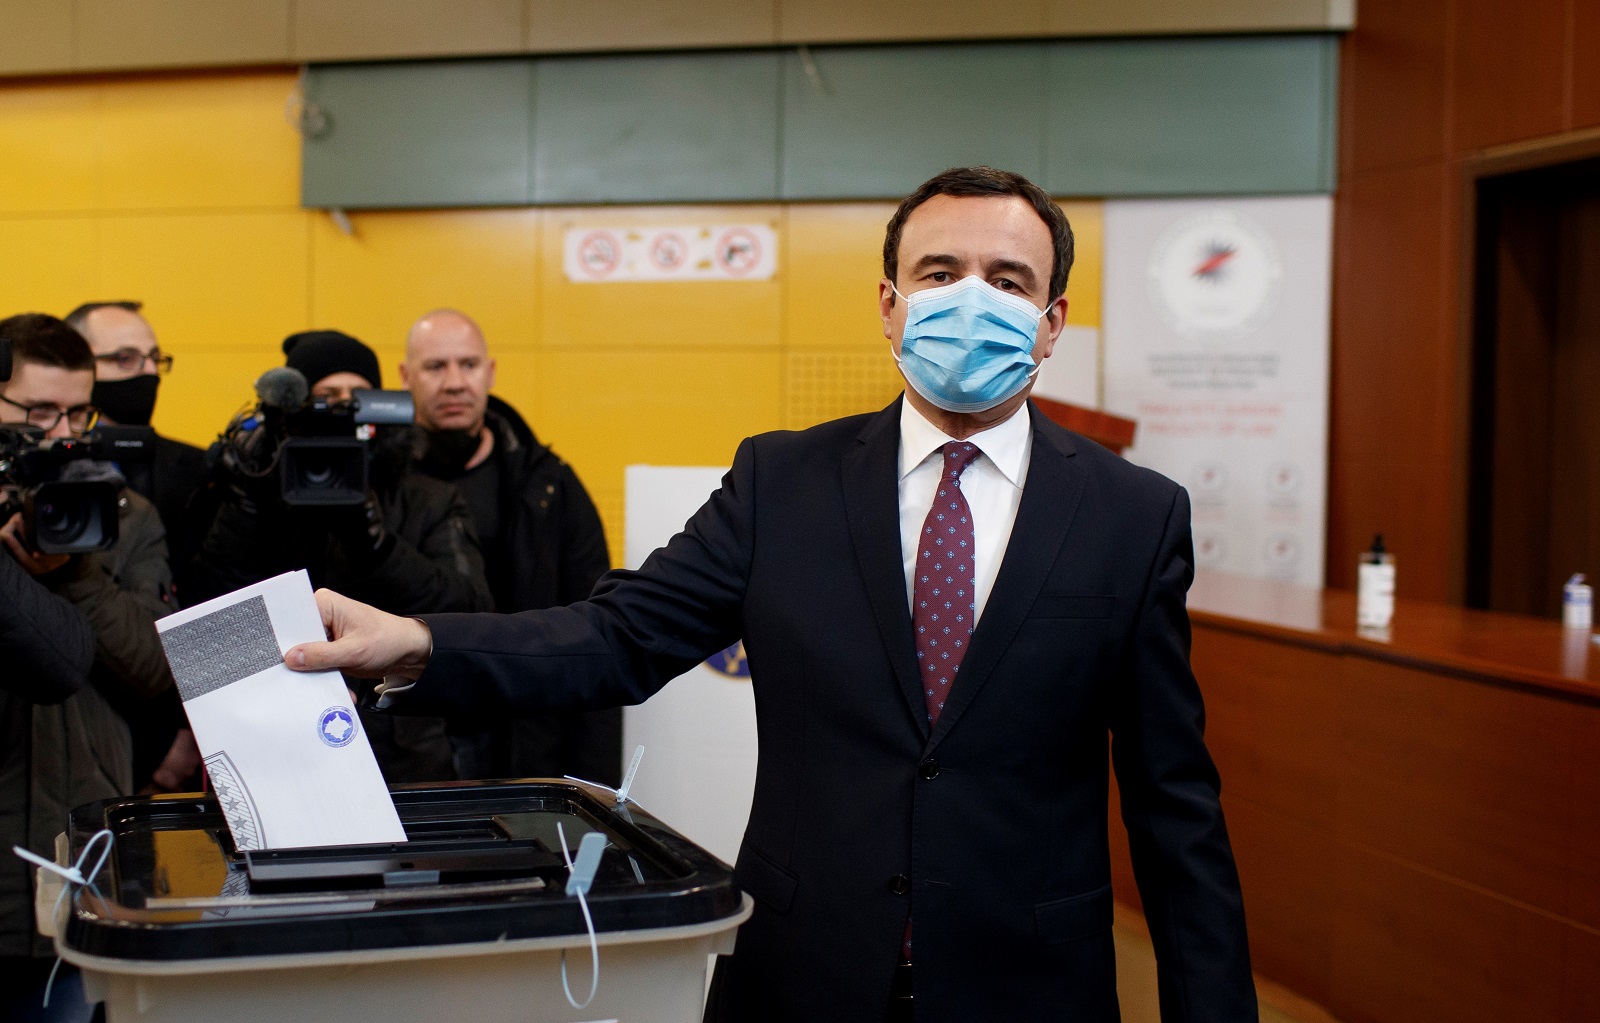 epa09011352 Leader of the movement Self-determination (Vetevendoje) Albin Kurti casts his vote at a voting center in Pristina, Kosovo, 14 February 2021. Kosovo's early parliamentary elections will be held on 14 February 2021. Around 1.8 million voters have the right to cast ballots during snap elections to elect a new 120 seat parliament.  EPA/VALDRIN XHEMAJ